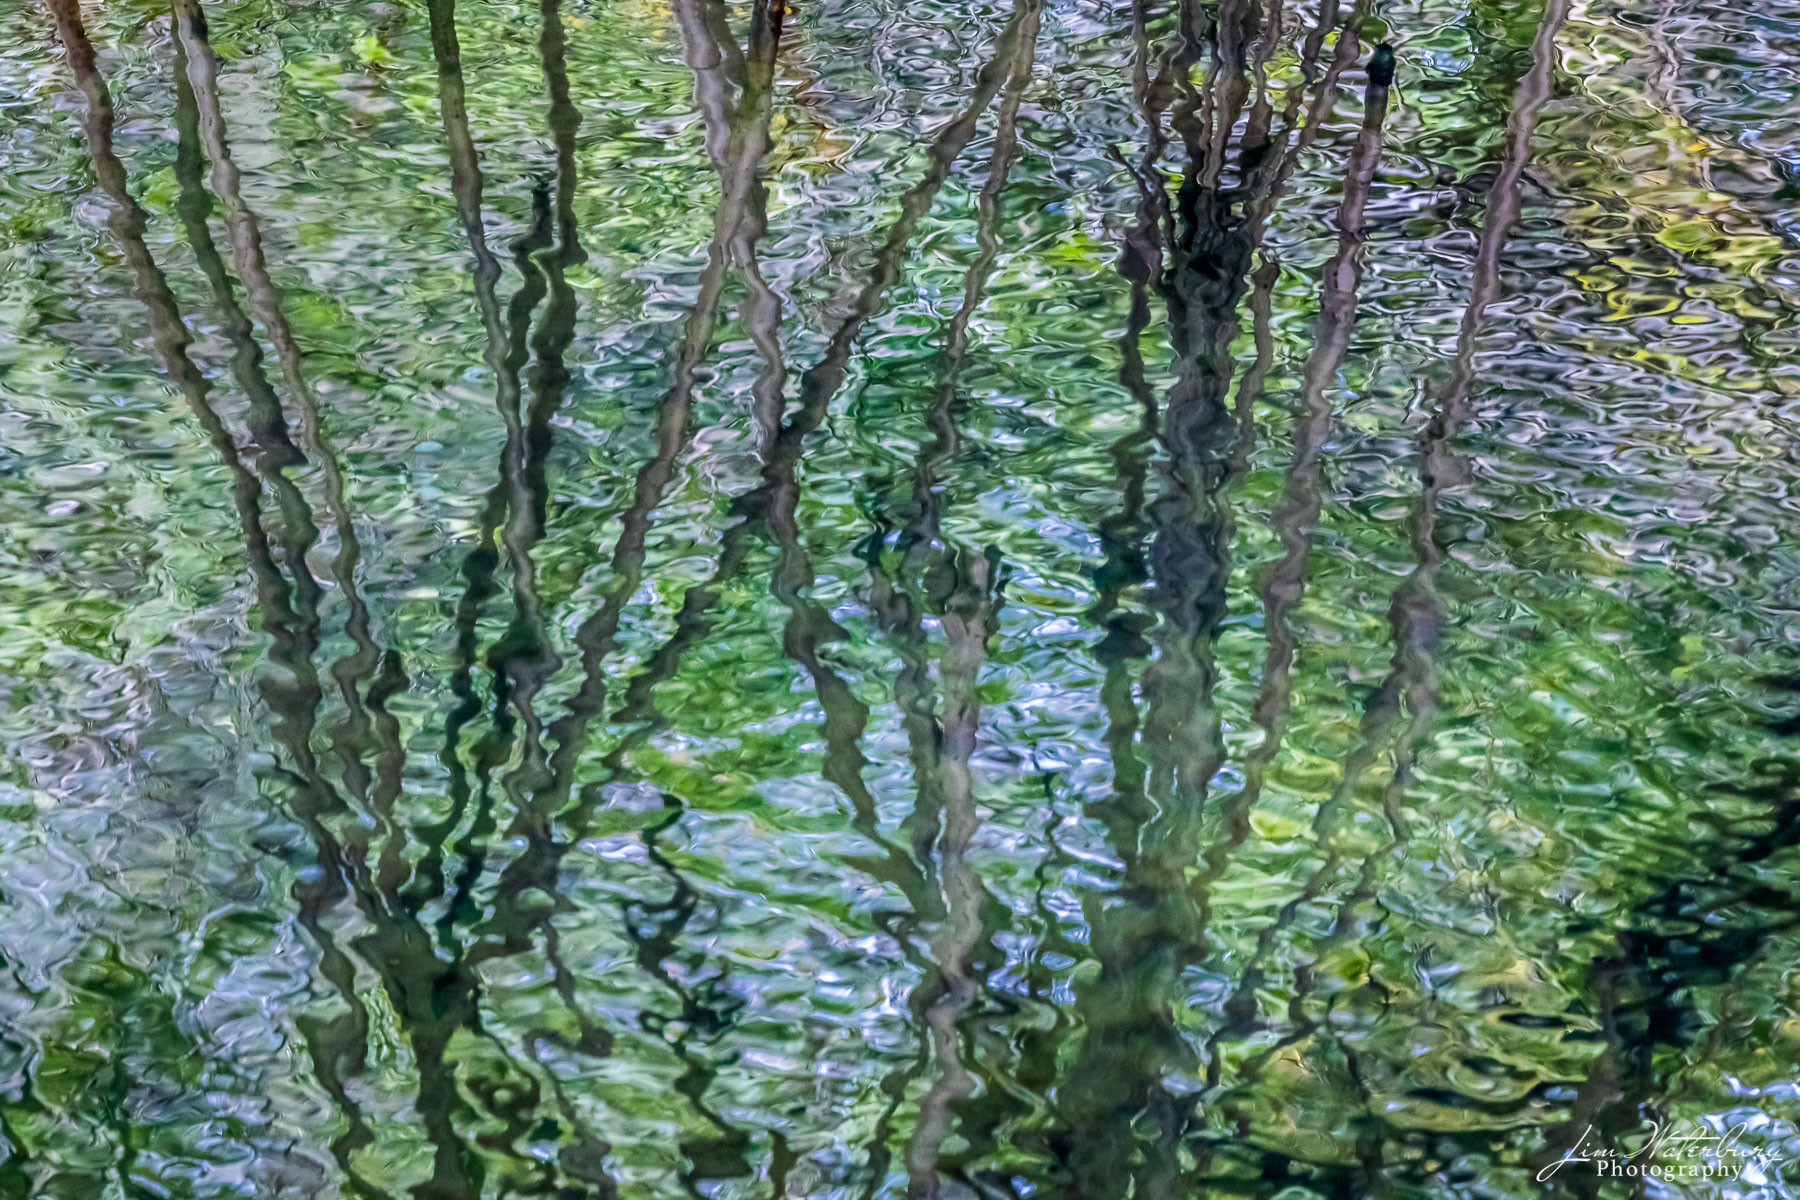 Reflection of tree branches and foliage in a pond in Hilo, Hawaii